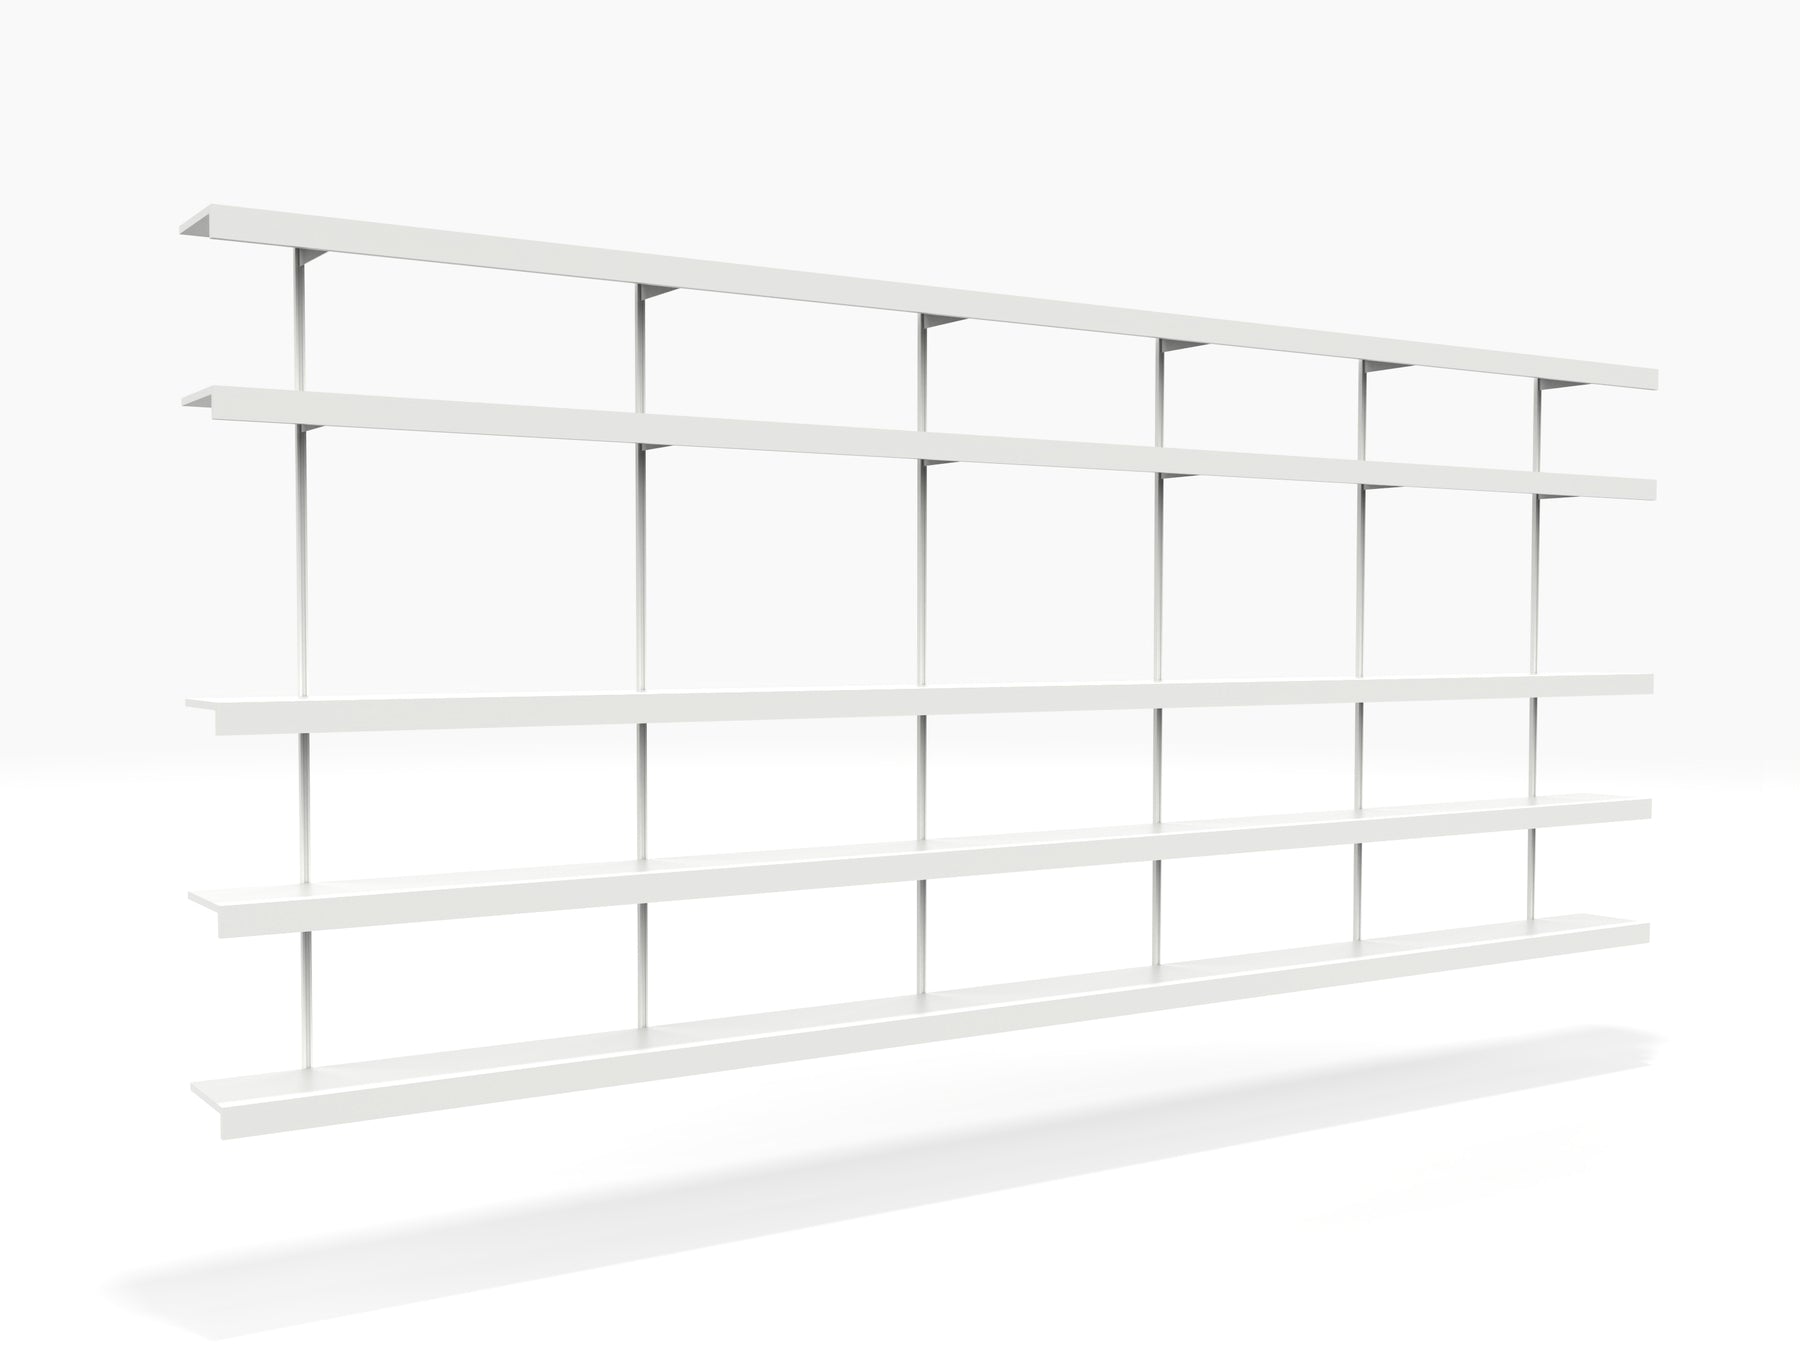 Large white shelving system wall mounted for books